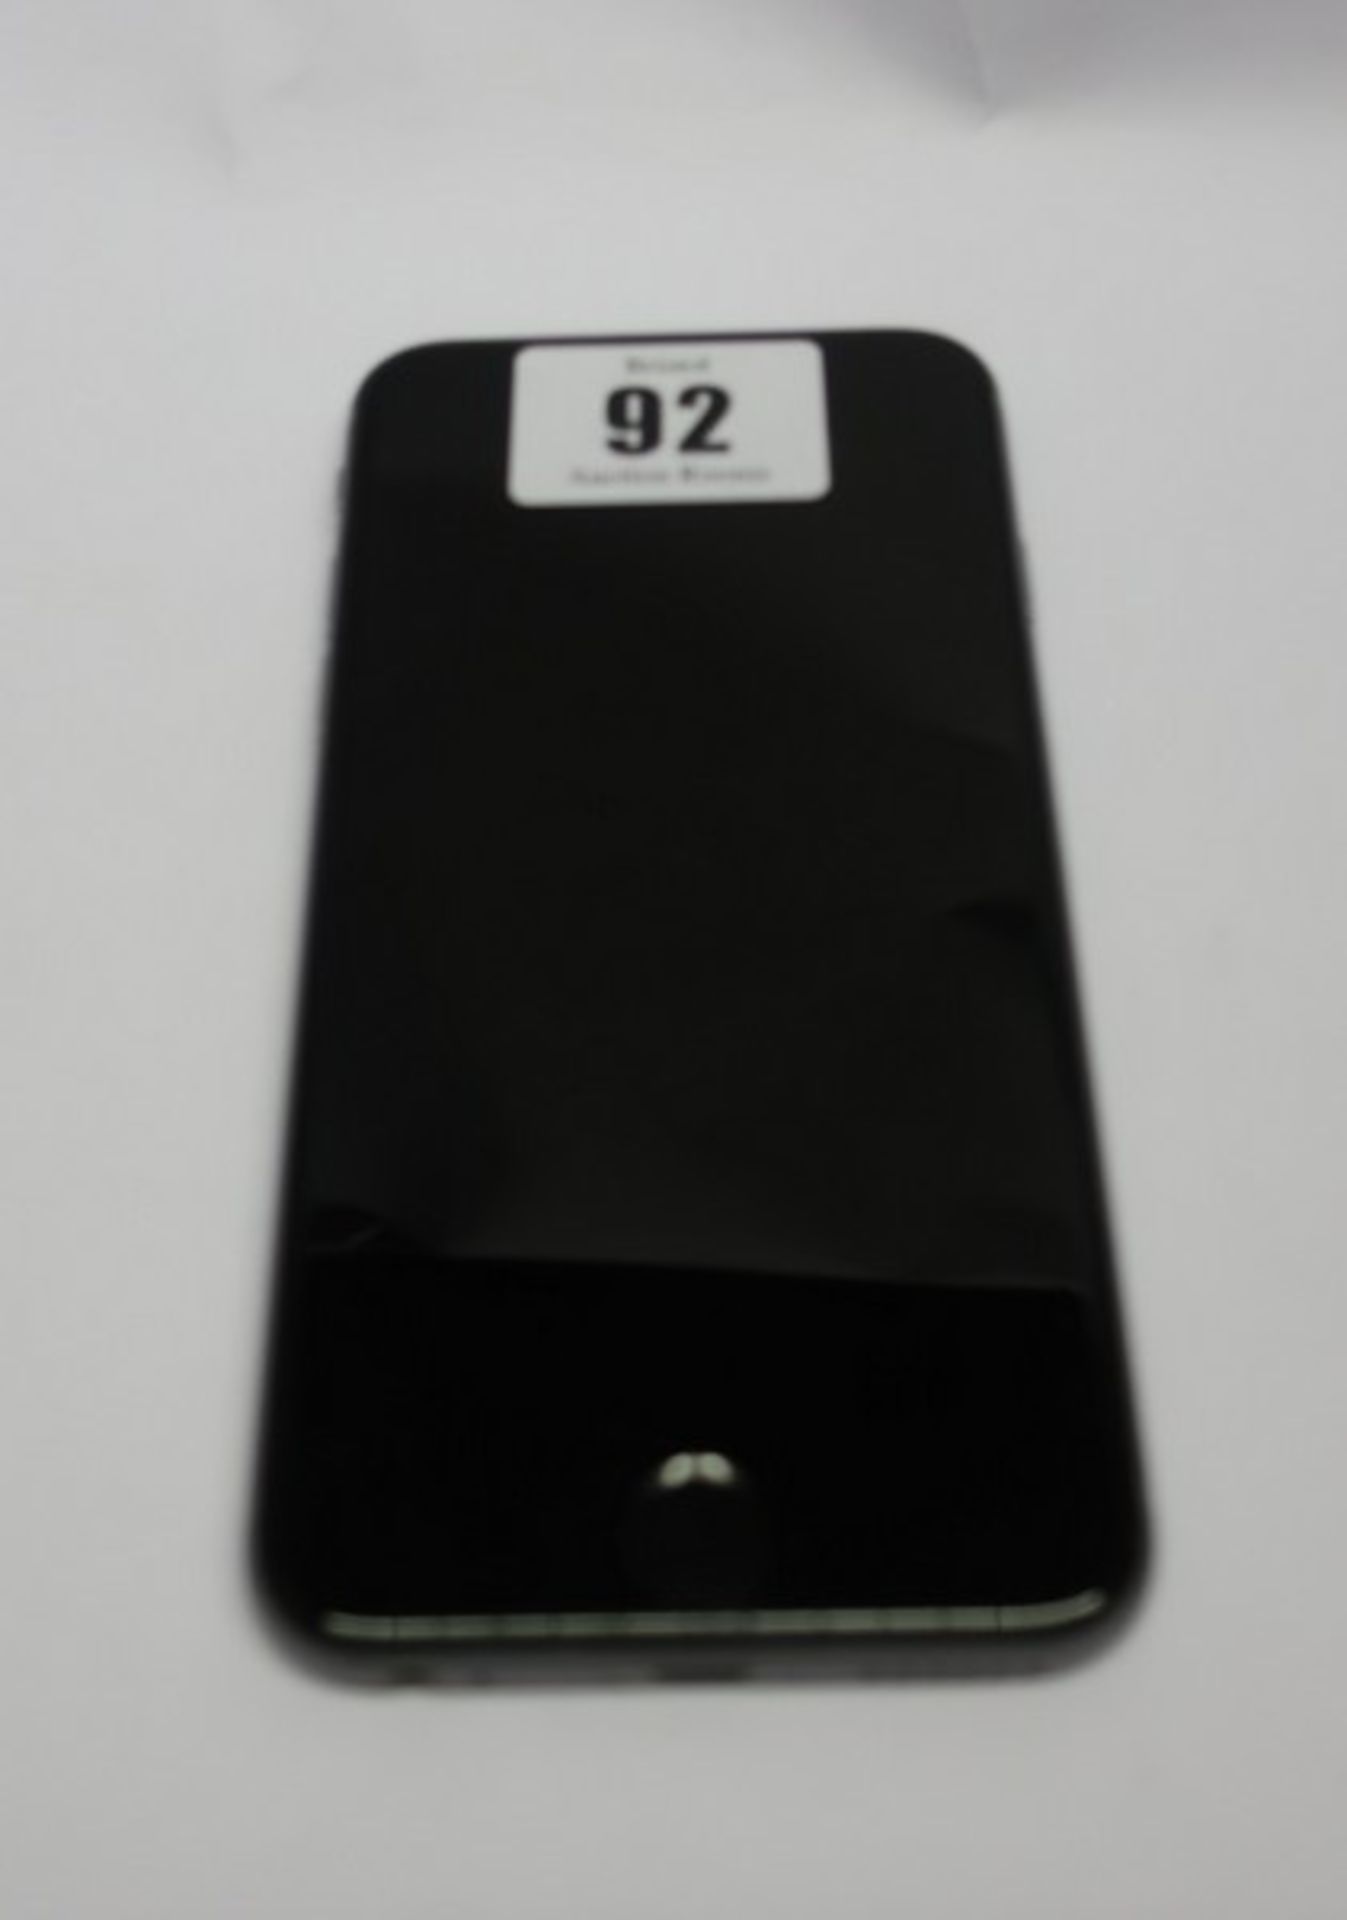 An Apple iPhone 6S 32GB model A1688 (IMEI: 359484089221116) (Activation locked) (Sold for spares